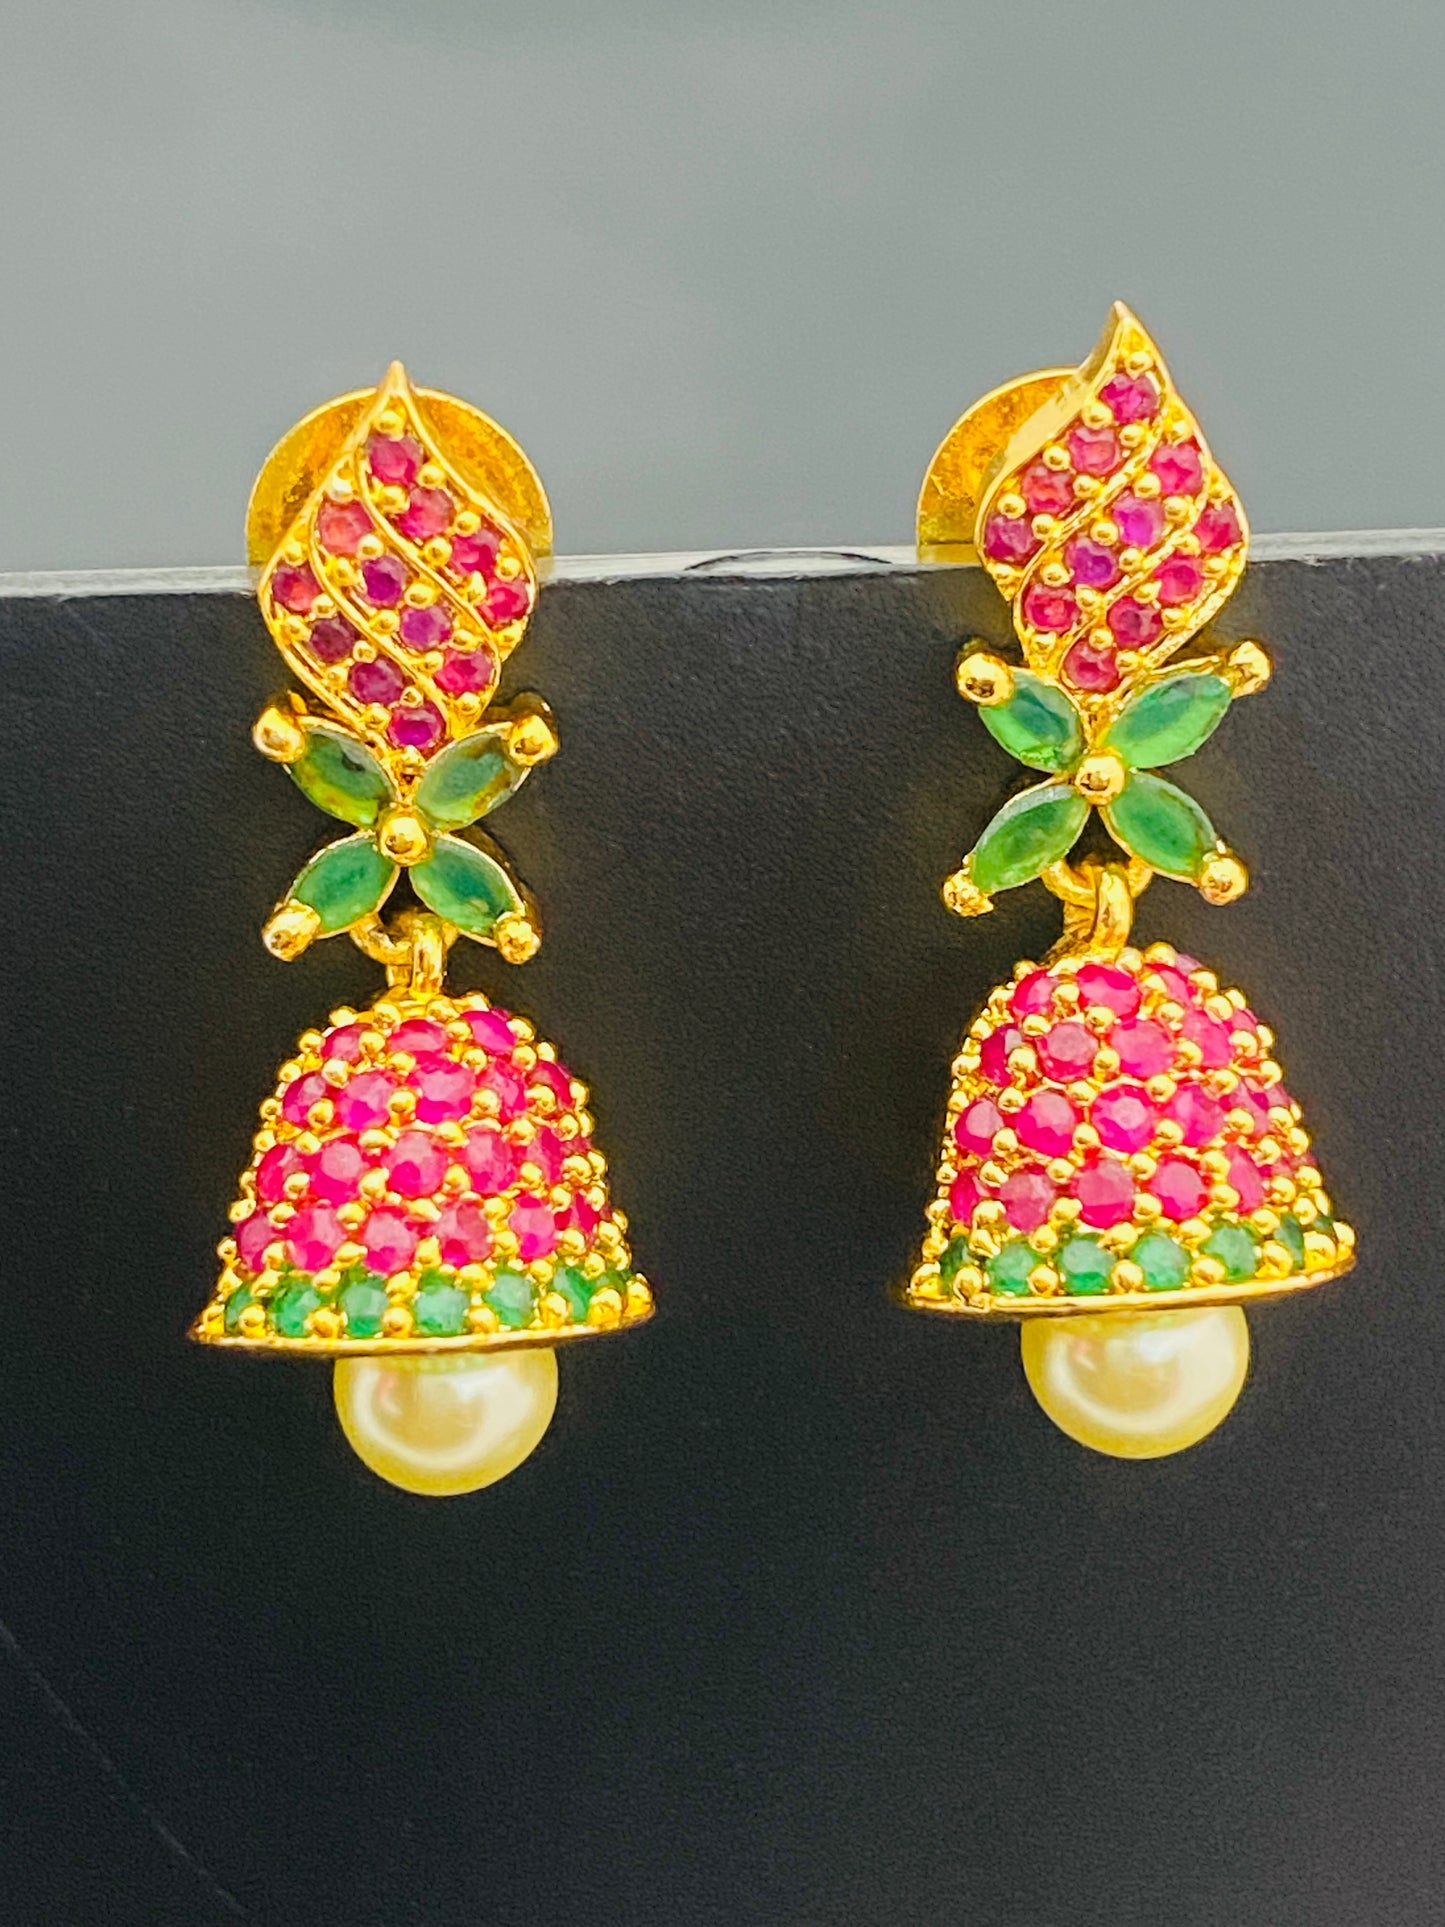 Emerald Stone Jhumka Earrings With Pearl Drops In Chandler